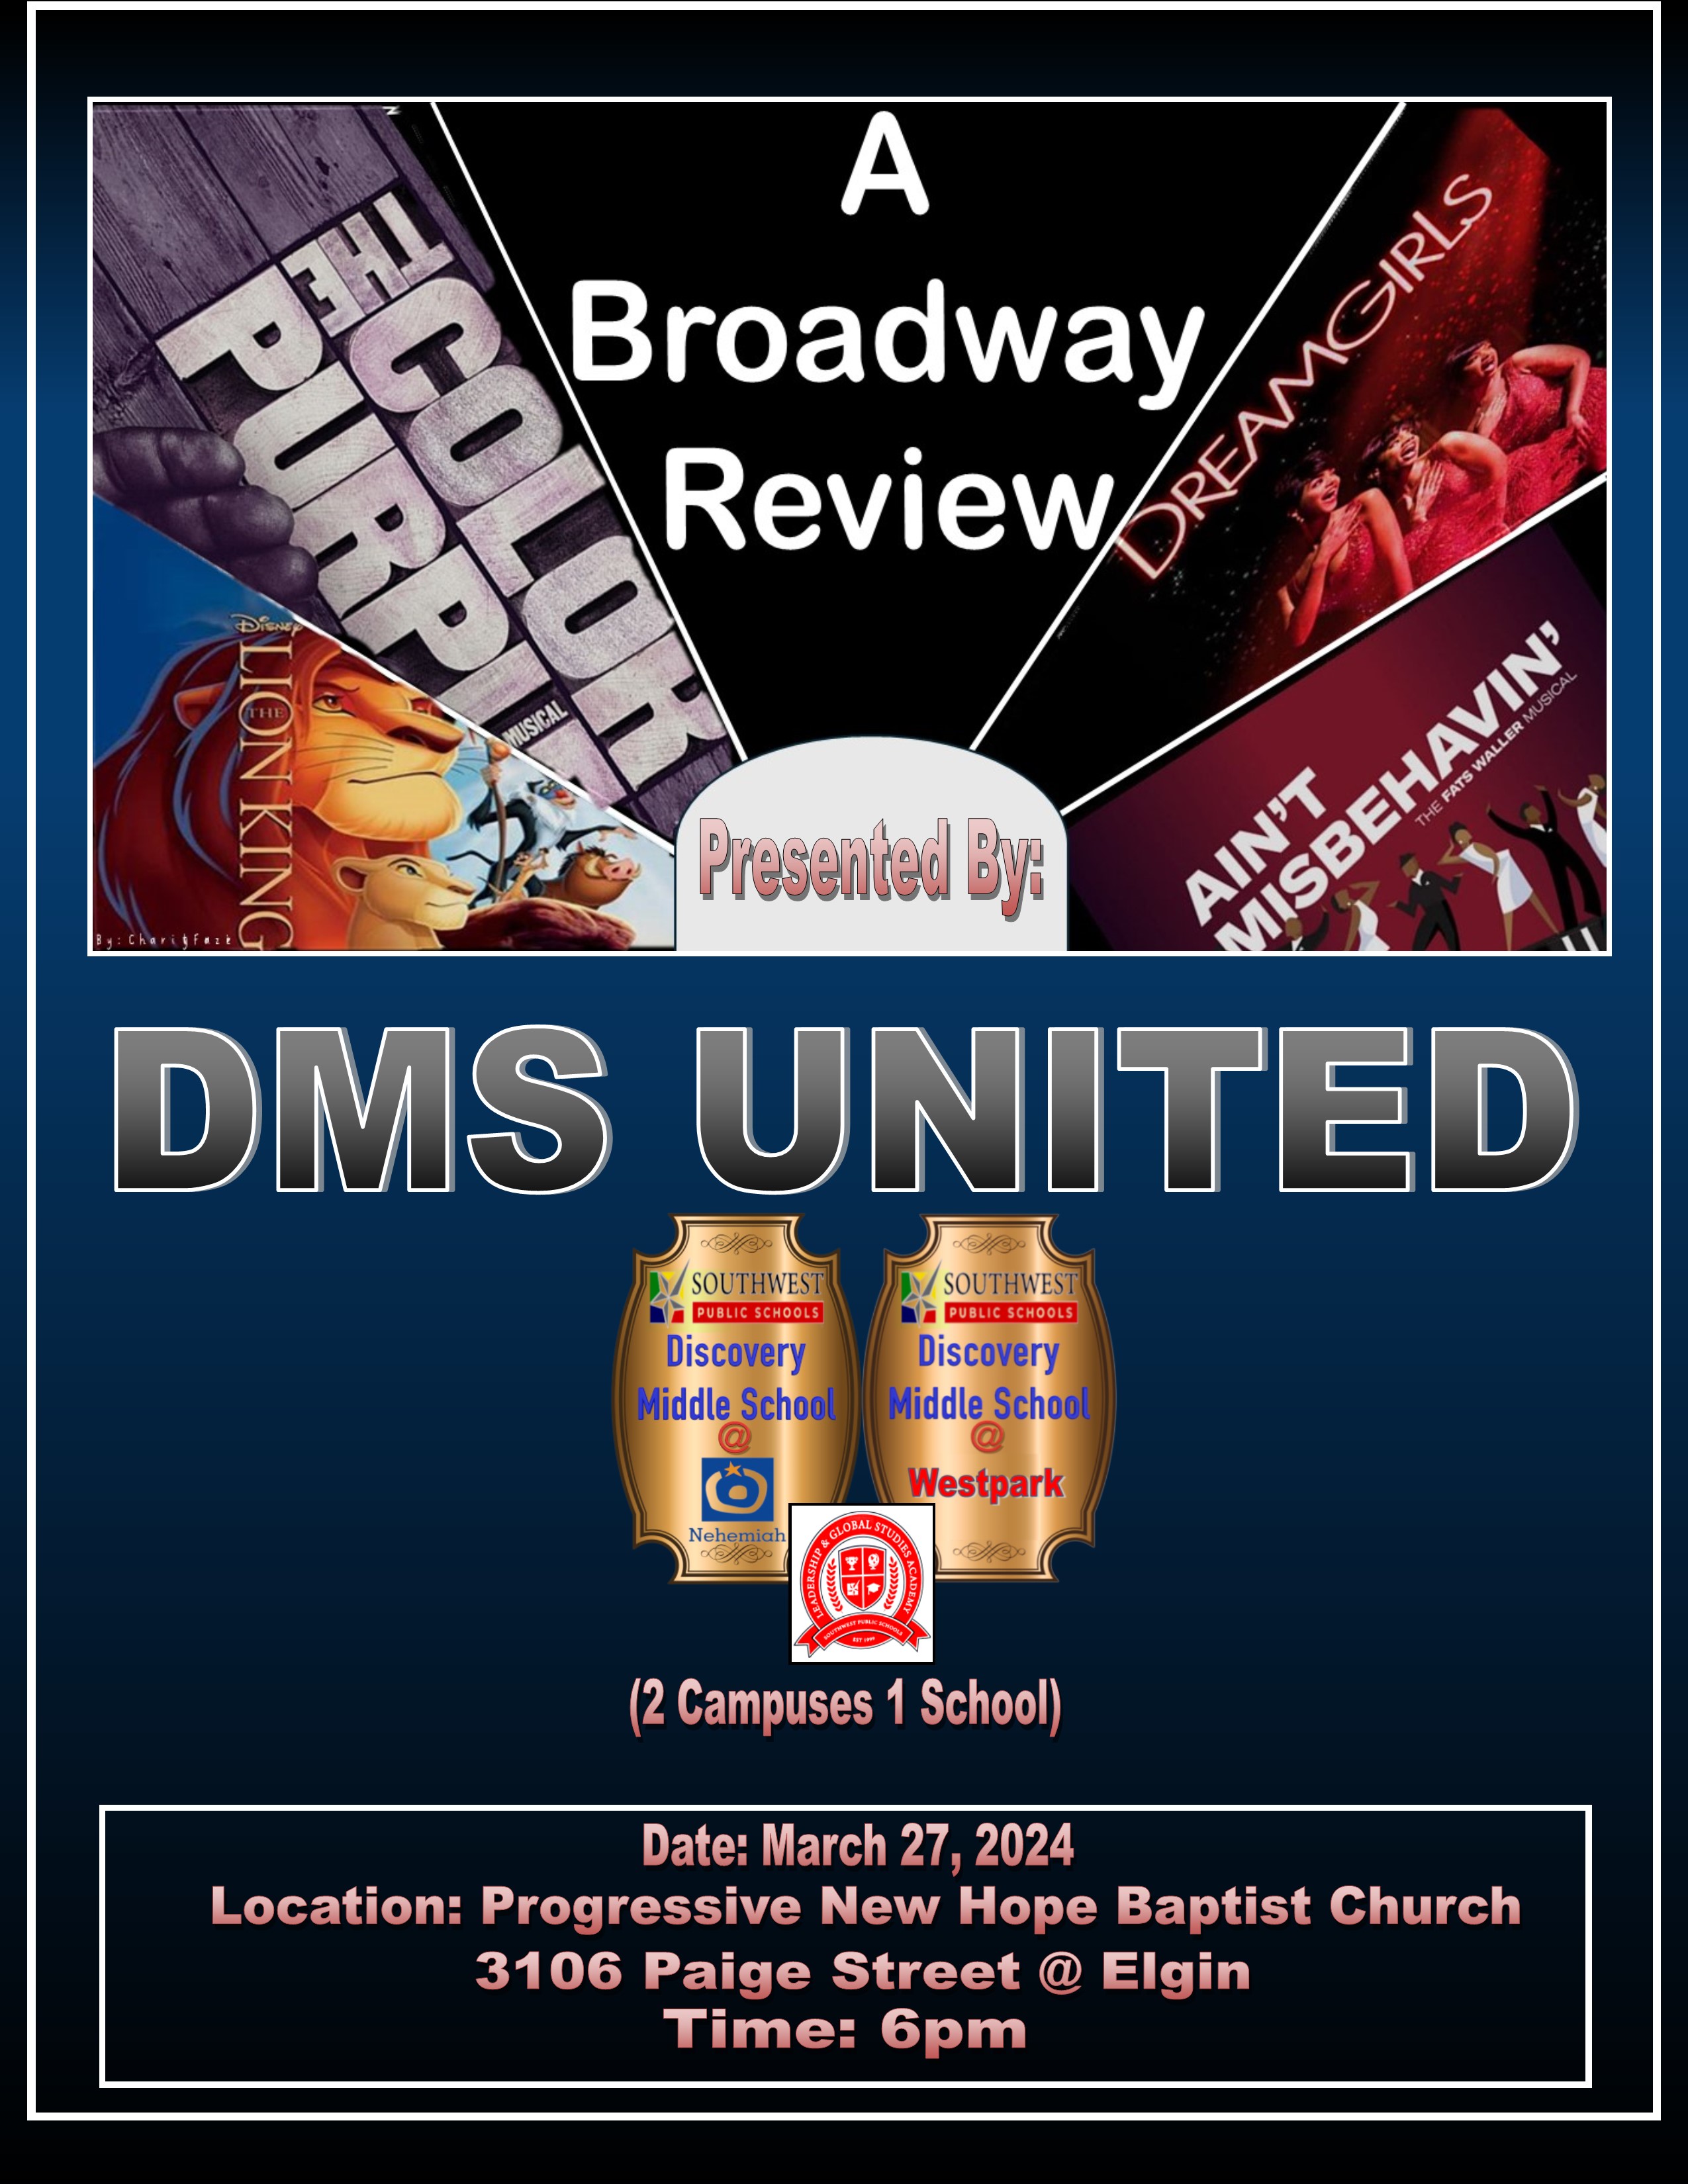 DMS United- A Broadway Review